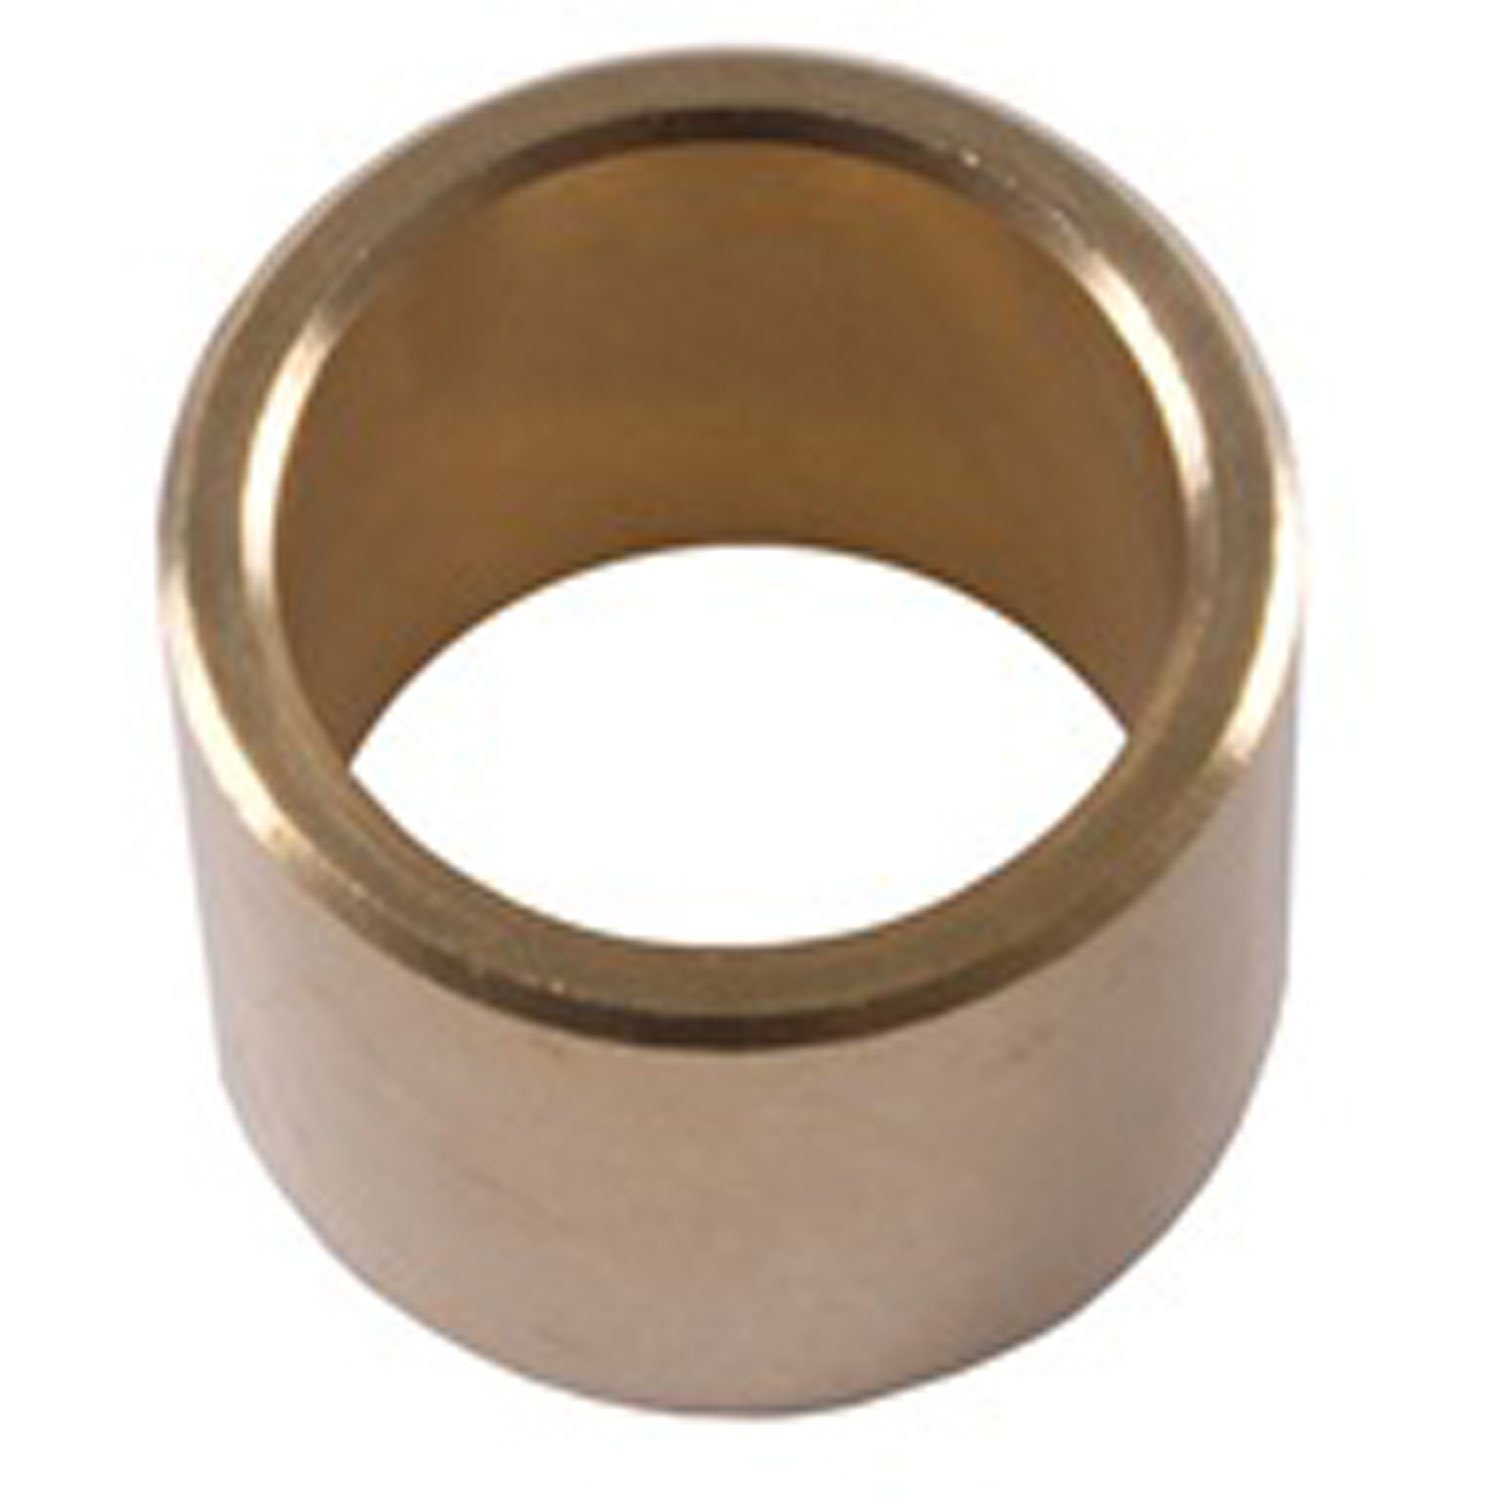 Replacement clutch pedal bushing from Omix-ADA, Fits 81-86 Jeep CJs and 87-95 Wrangler YJ with manual transmissions.